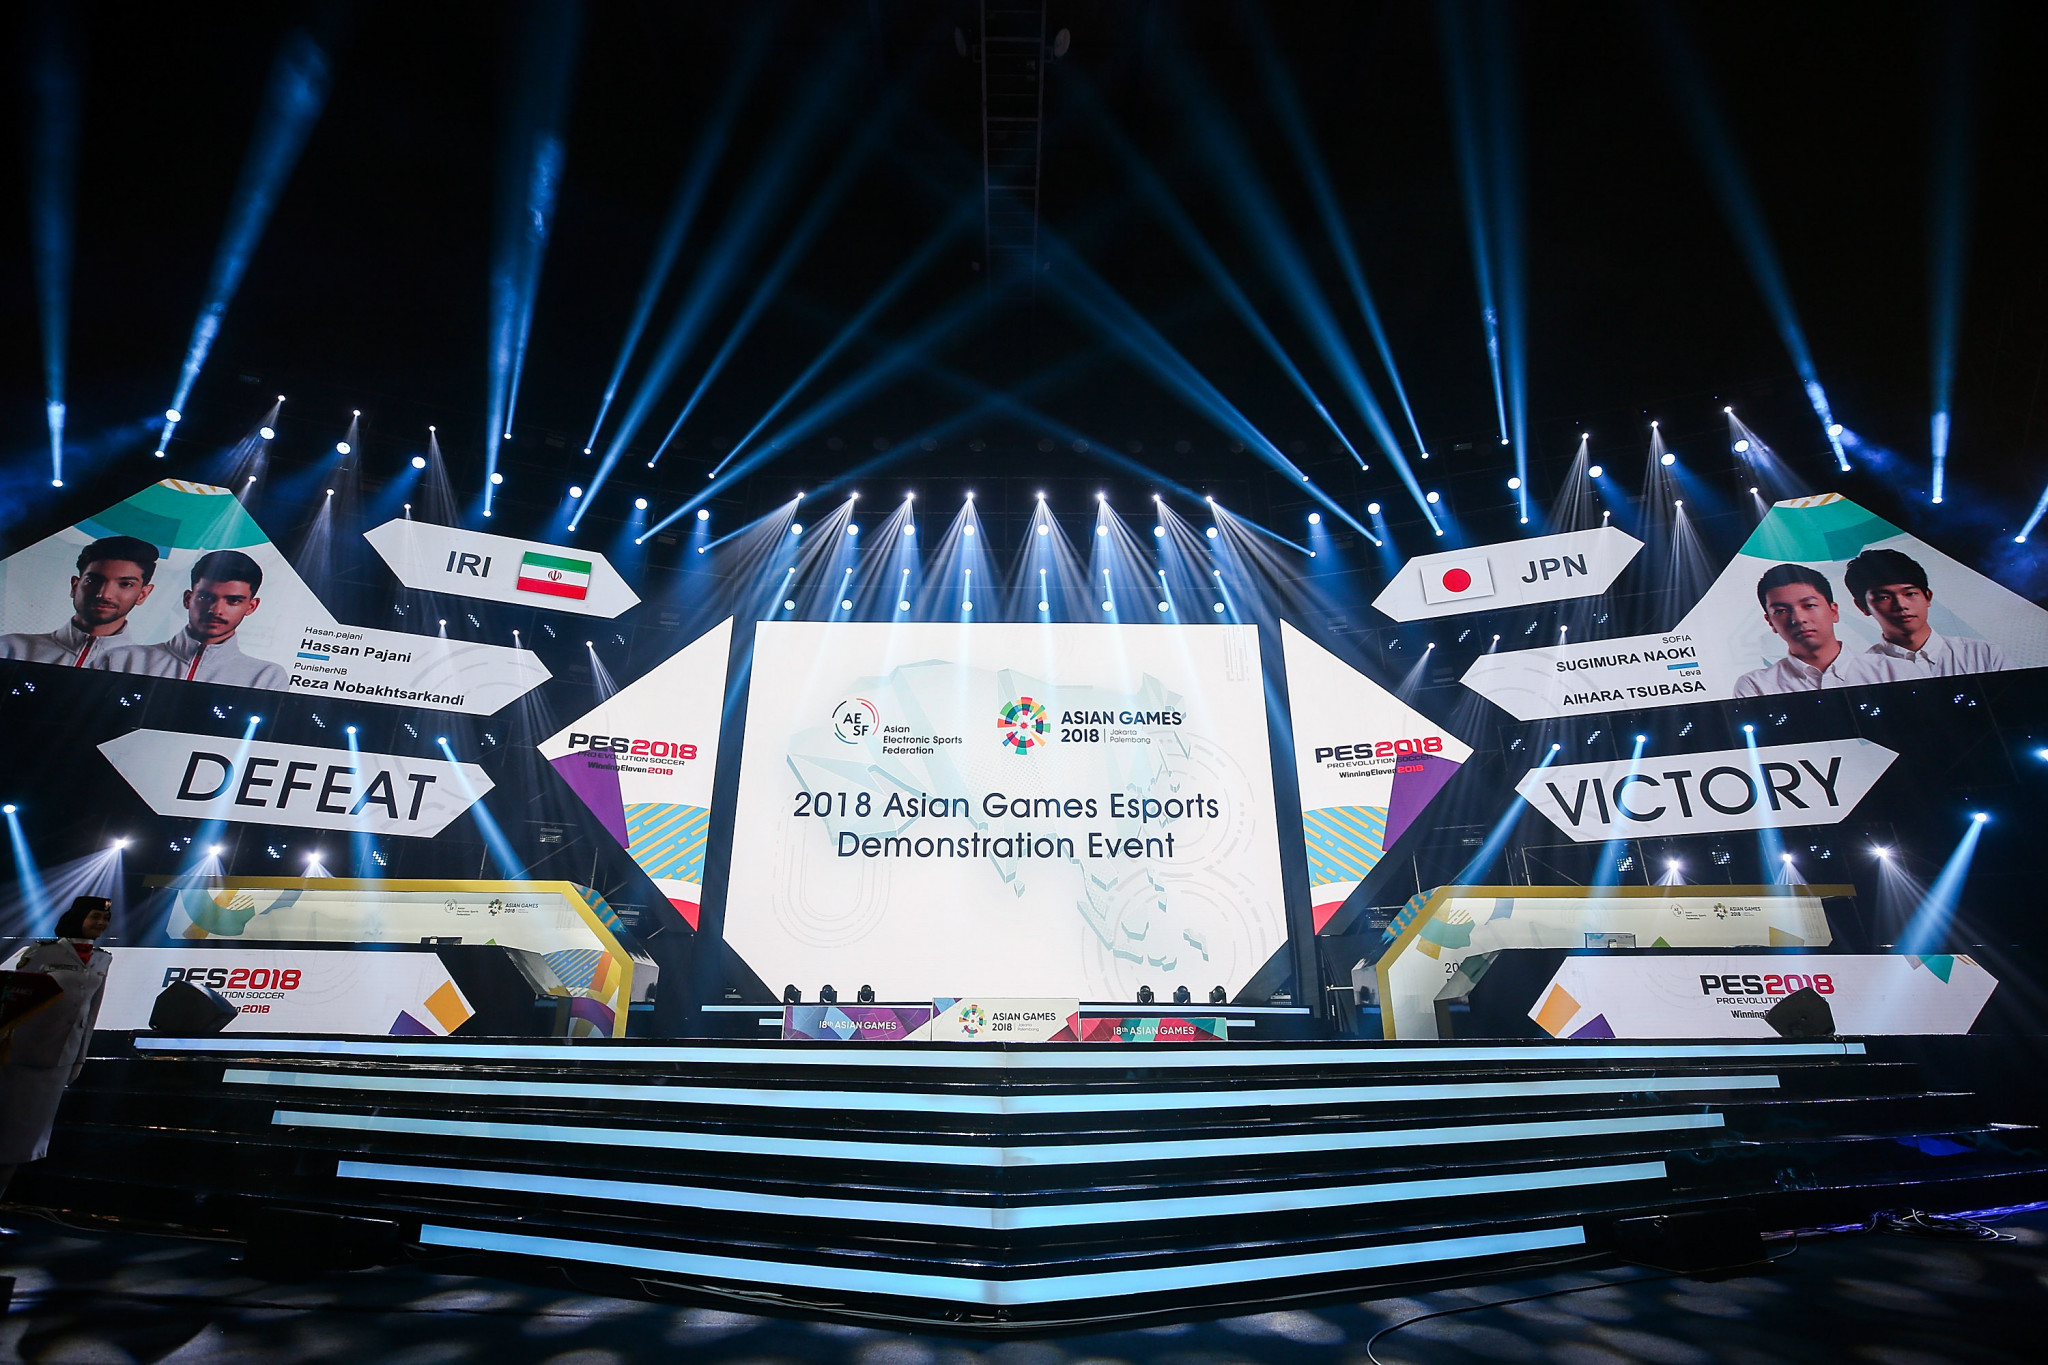 Esports is set to appear as an official medal event at the Asian Games for the first time at Hangzhou 2022 after featuring as a demonstration event in 2018 ©Getty Images